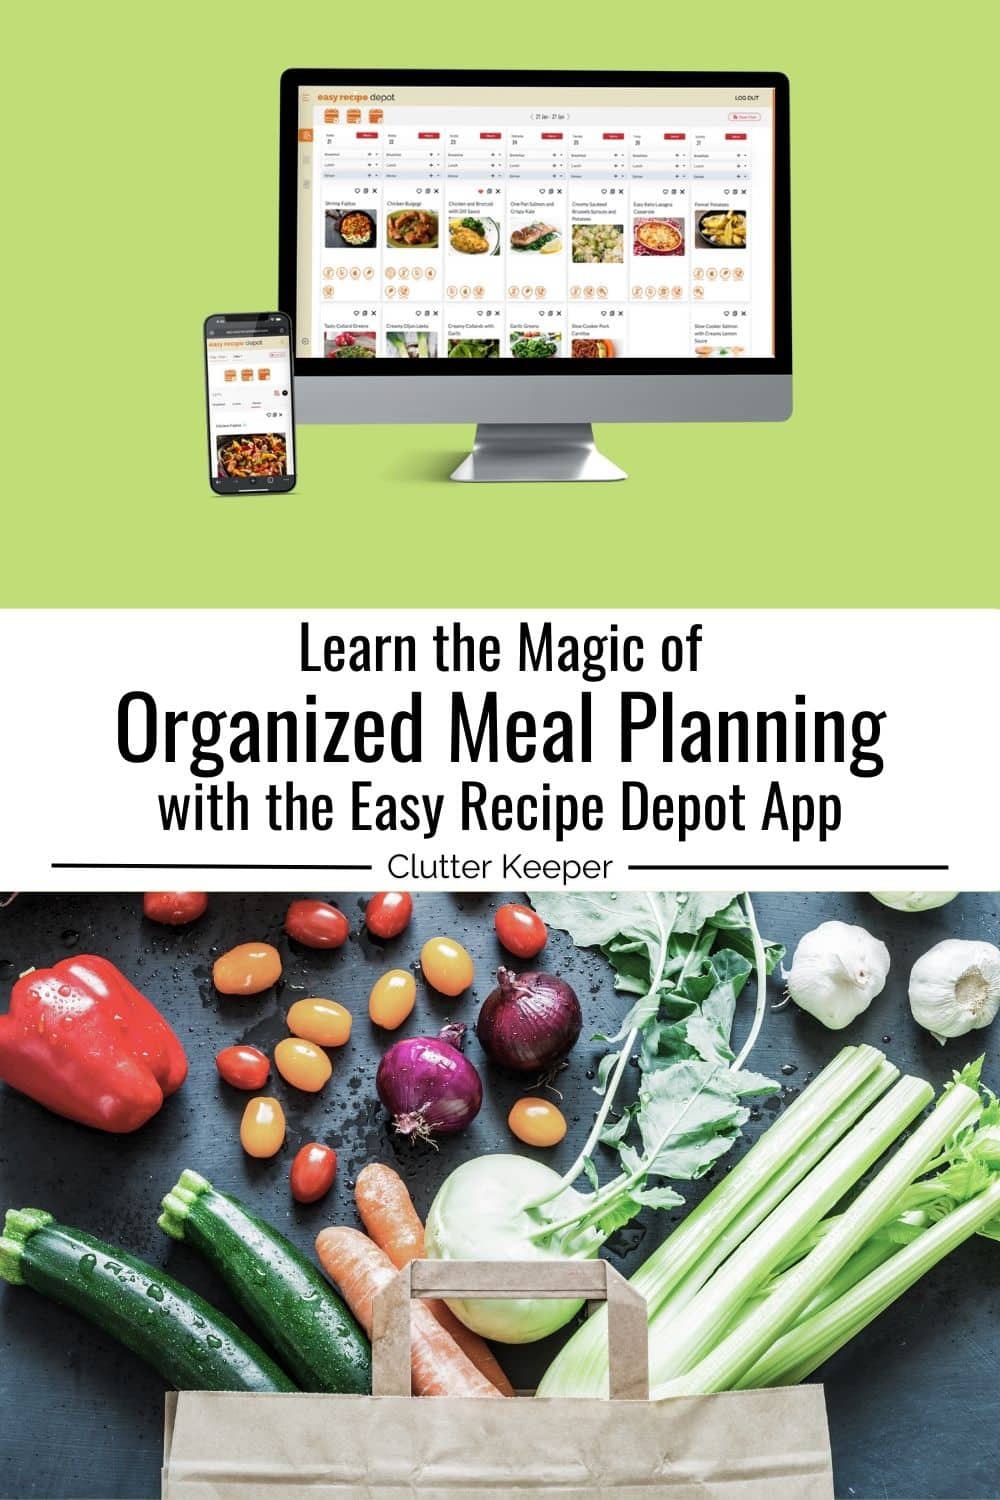 Learn the magic of organized meal planning with the Easy Recipe Depot app.